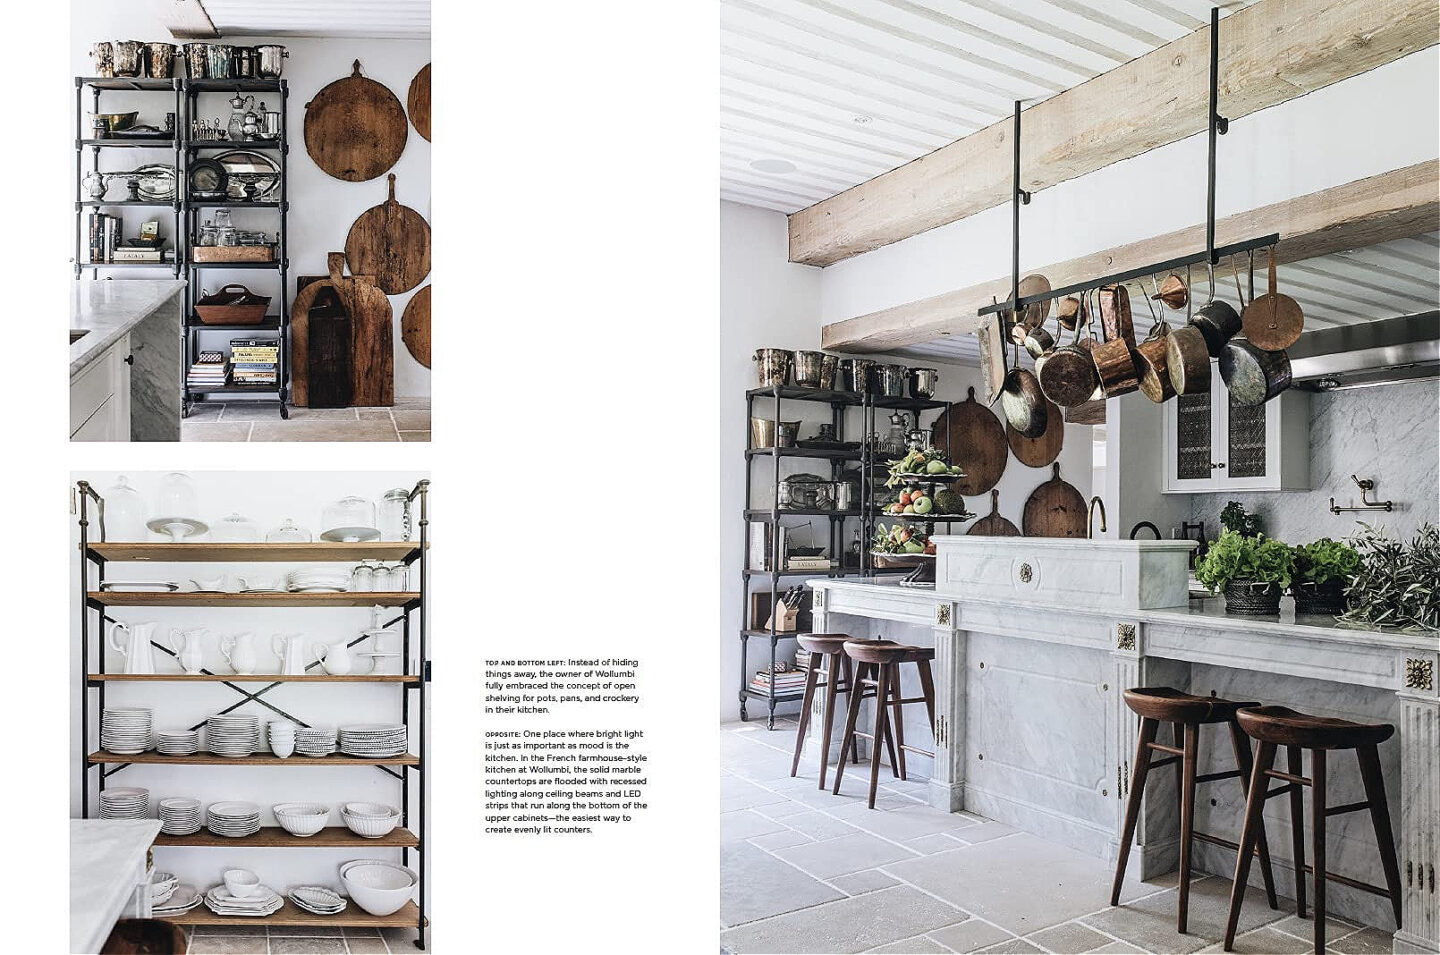 A gorgeous French inspired kitchen with open shelving, marble, and timeless design - from Melissa Penfold's Living Well By Design (Vendome, 2021).